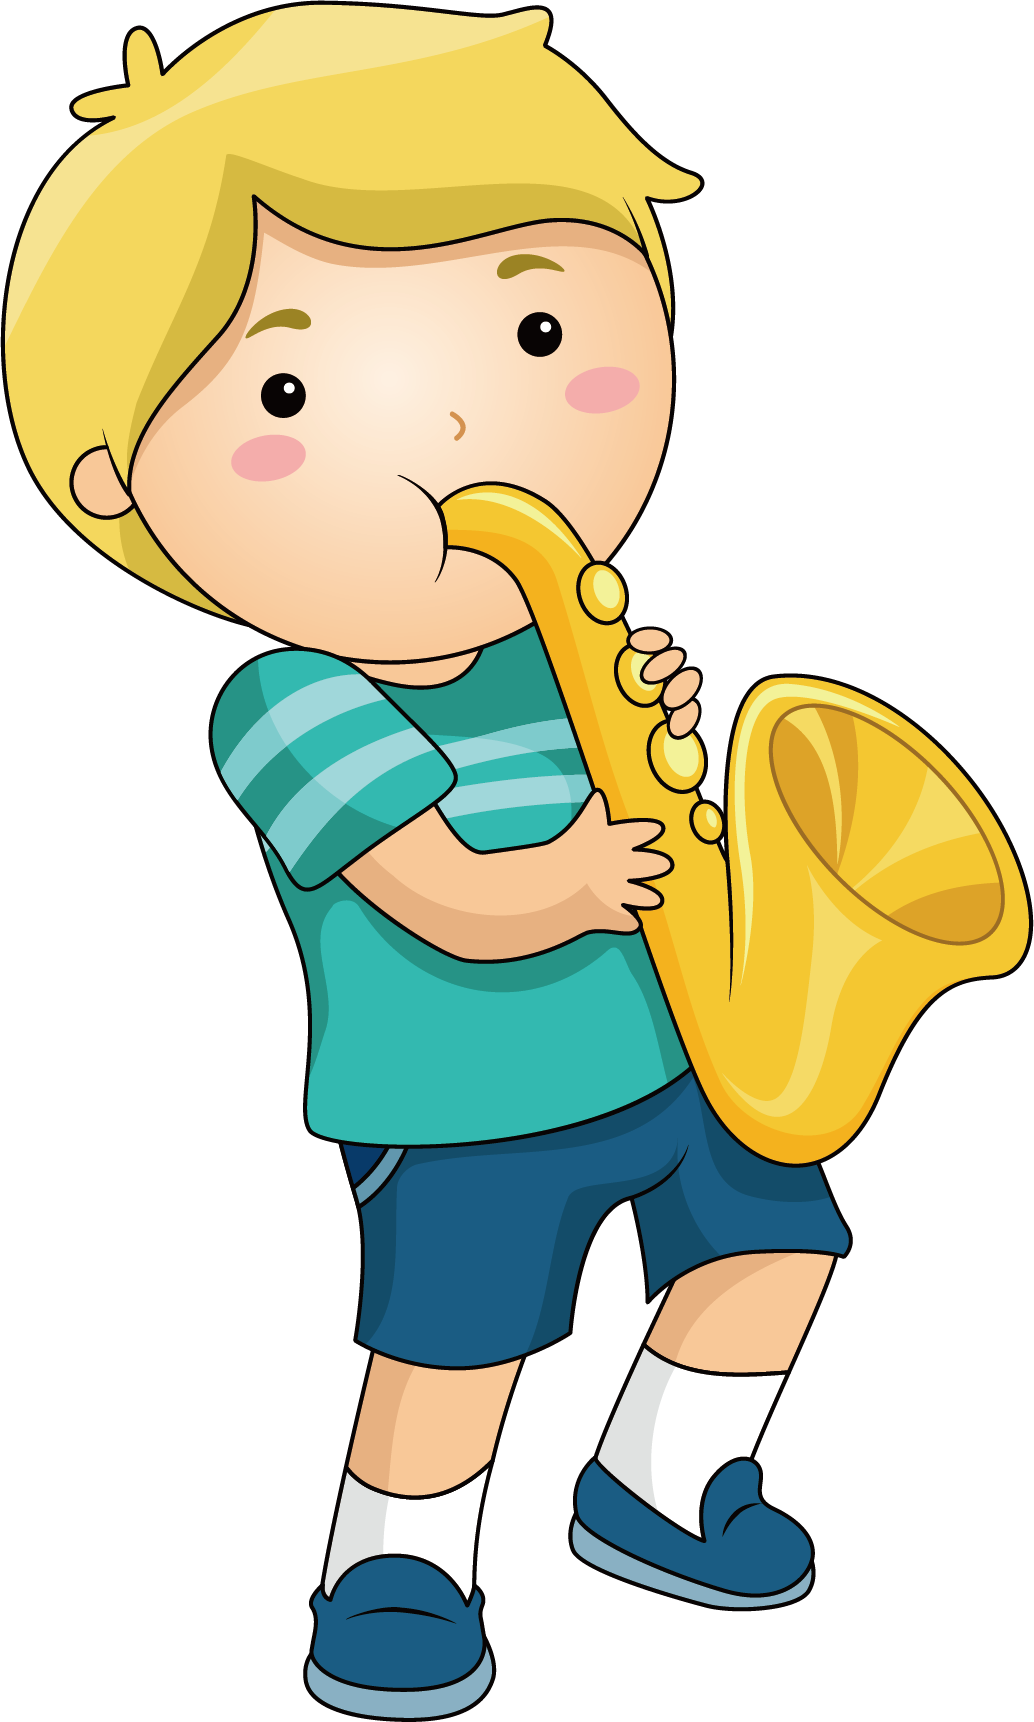 Musical royalty free stock. Toddler clipart instrument